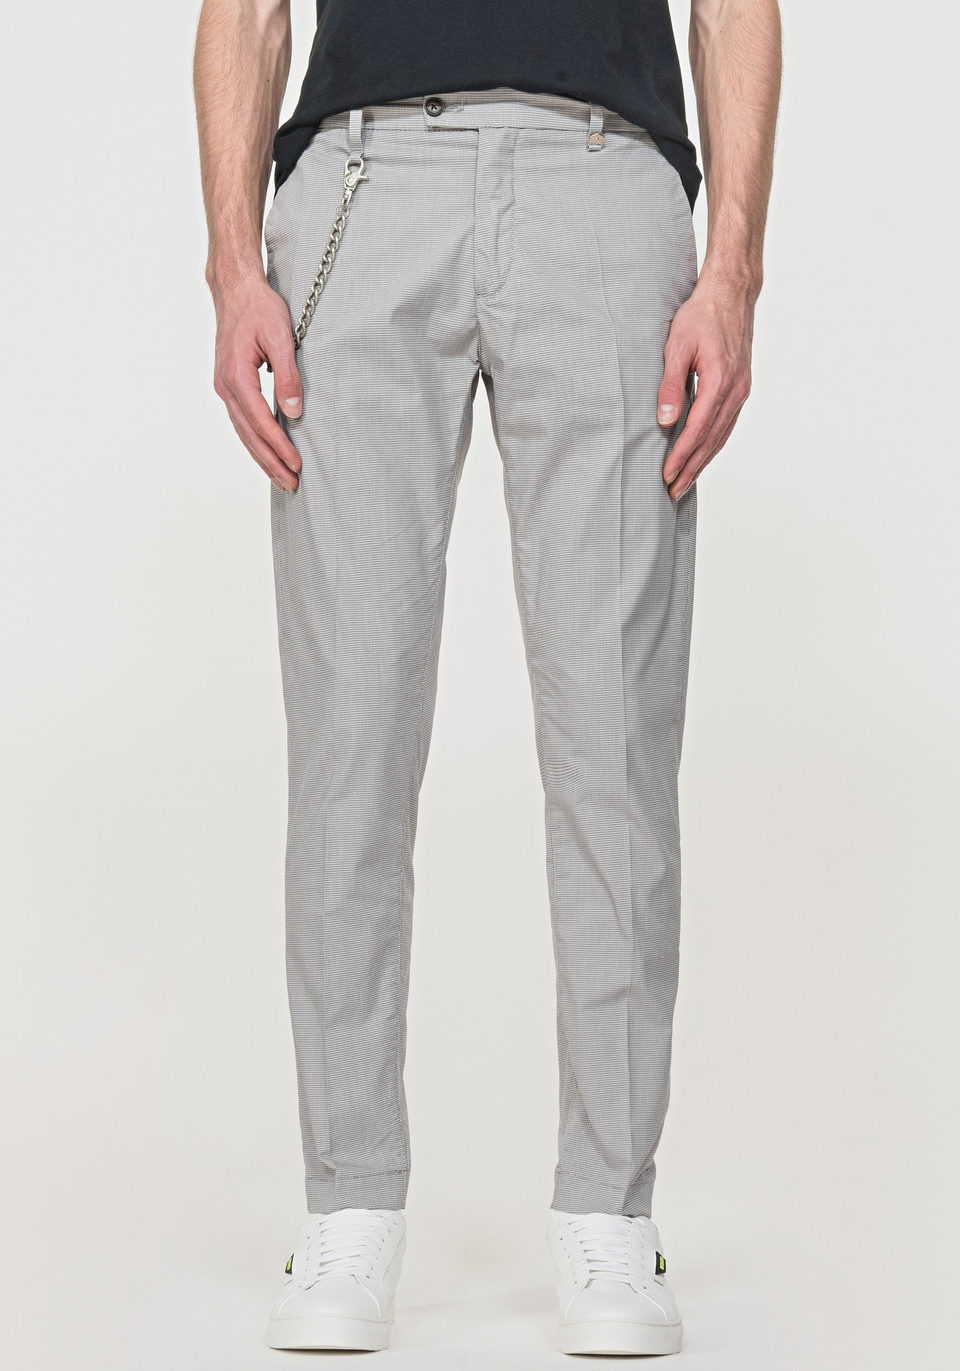 “KERR” SLIM-FIT TROUSERS IN COOL COTTON WITH A MICRO-CHECK PATTERN - Antony Morato Online Shop